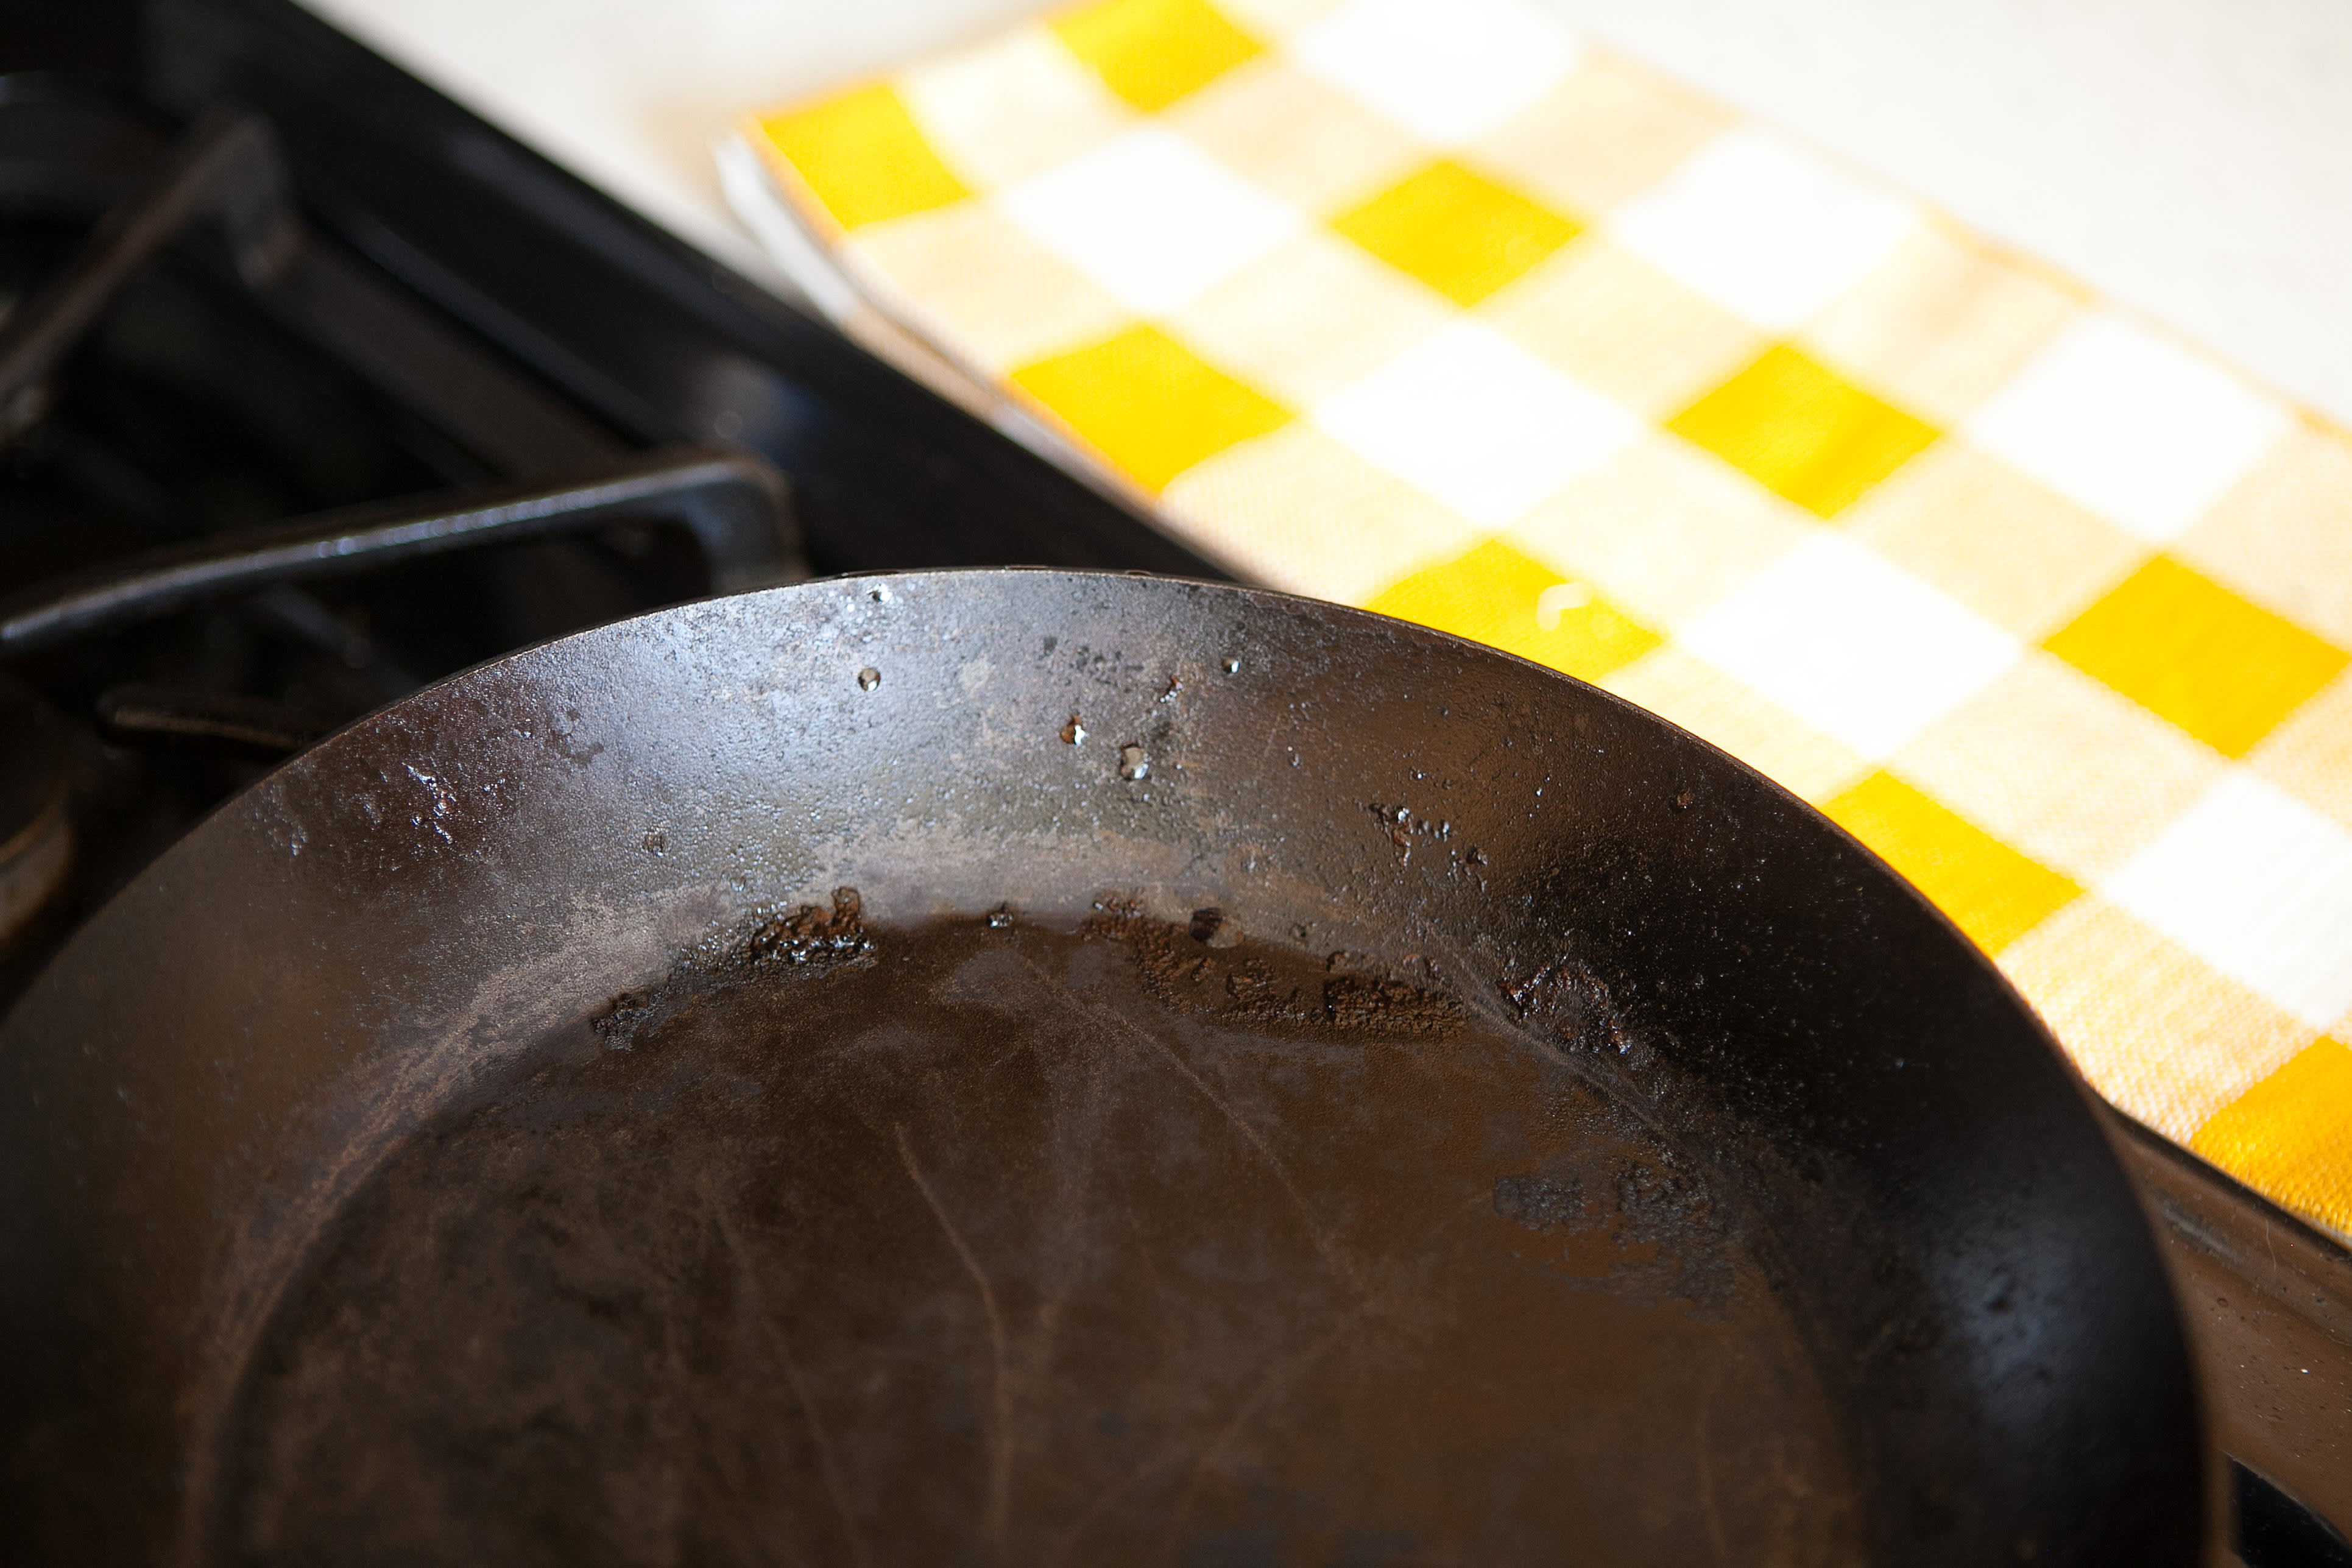 How to Care for a Carbon Steel Pan